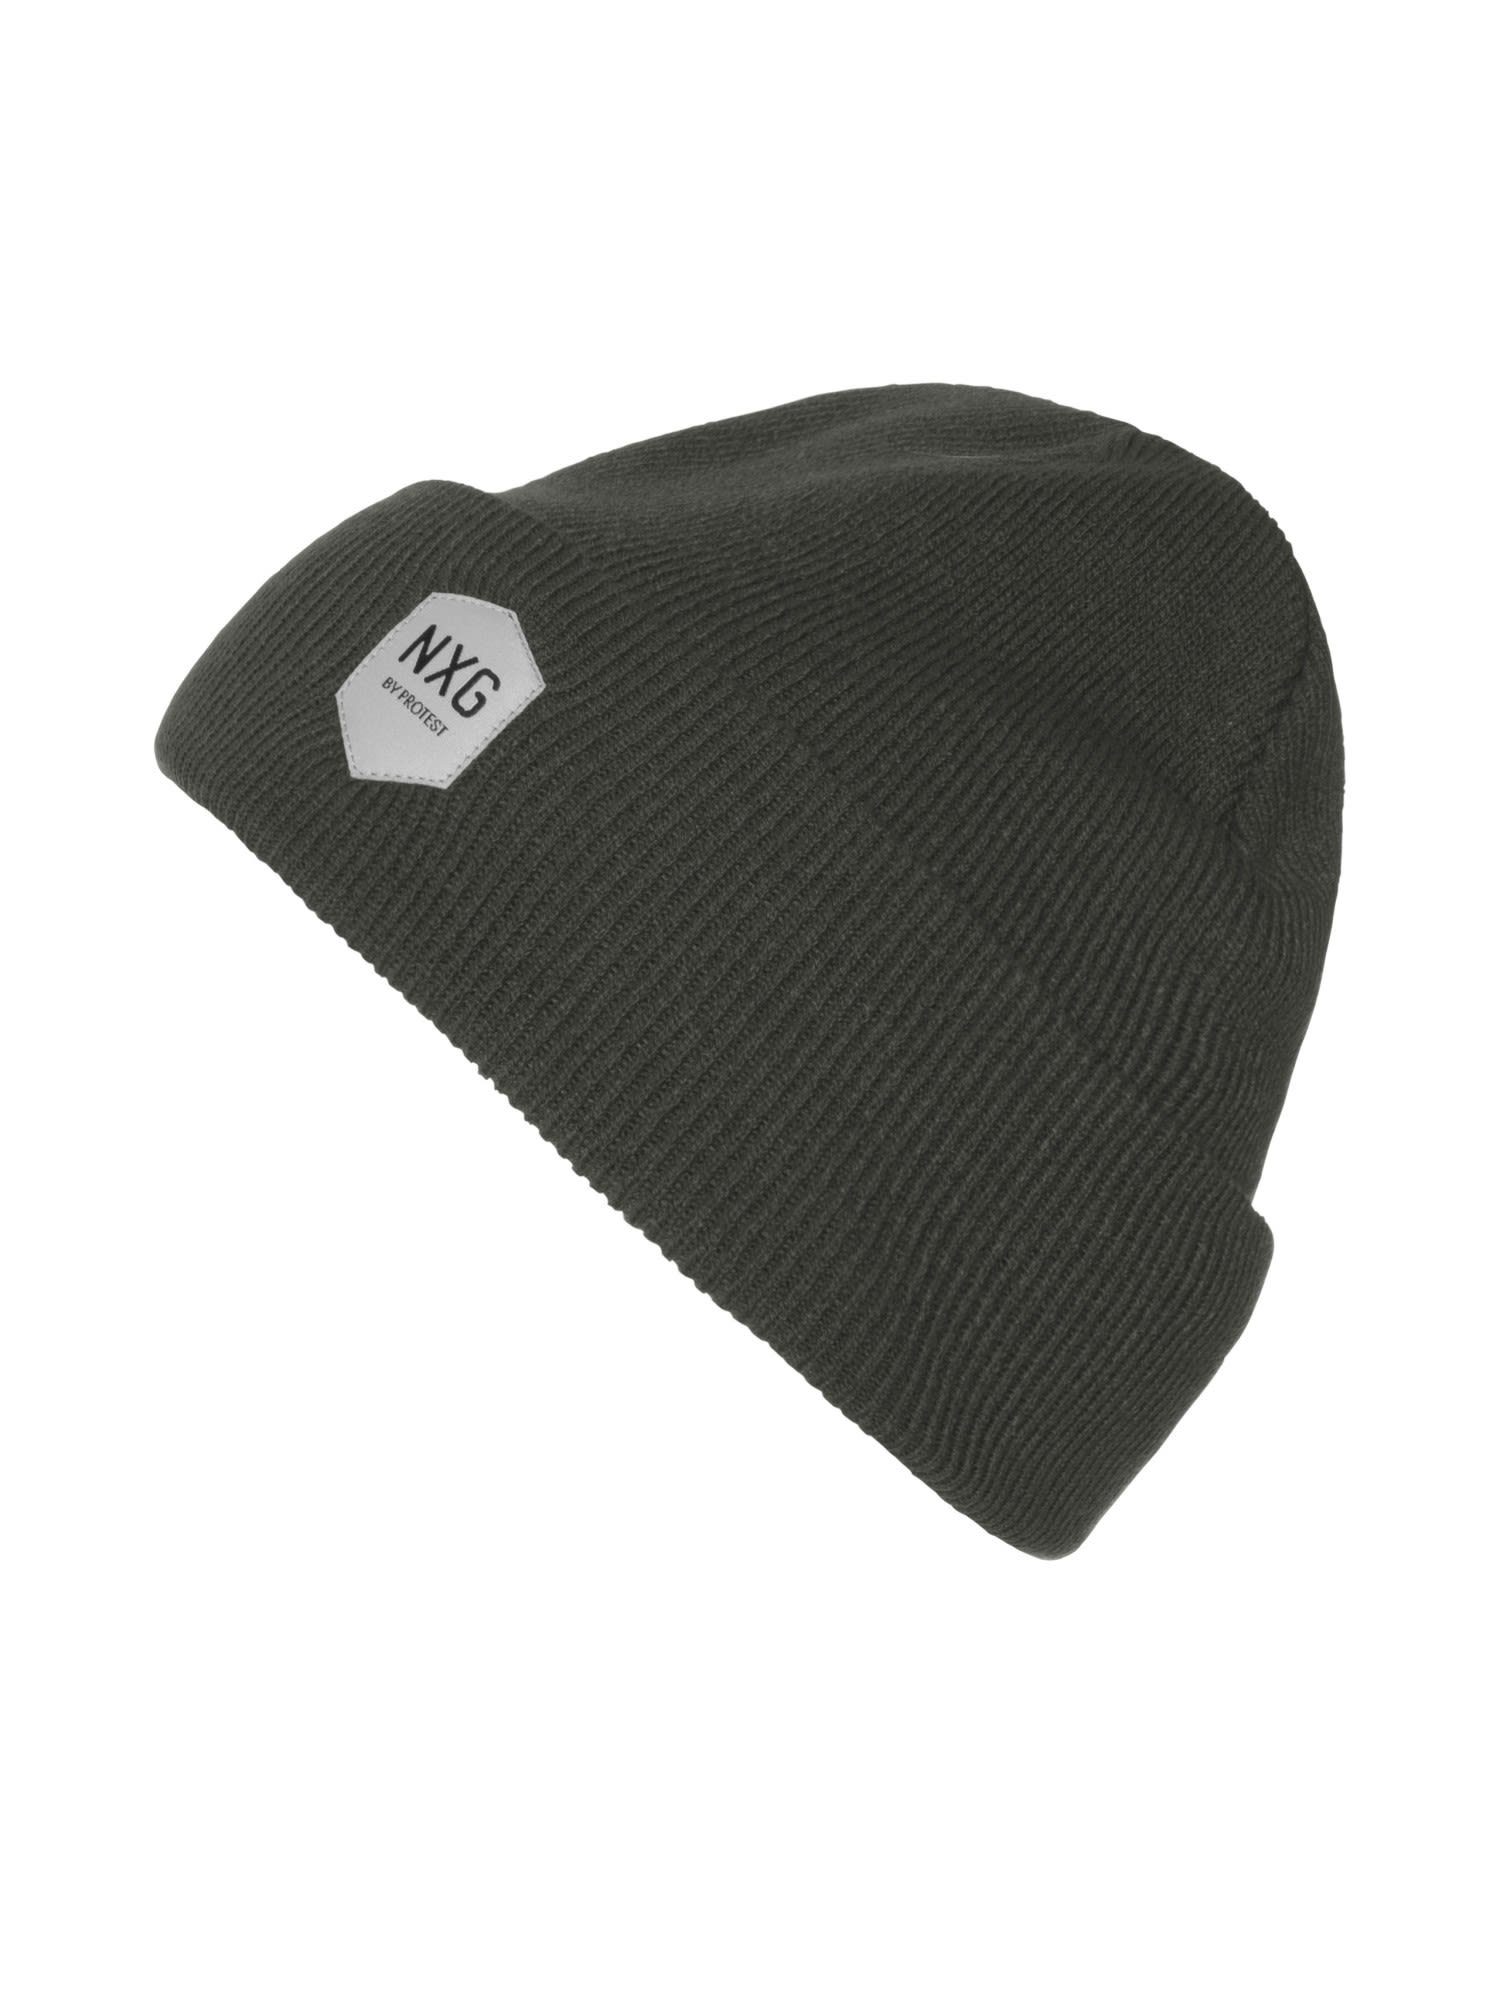 Nxg Beanie Rebelly Protest Accessoires Hunter Green Beanie Protest